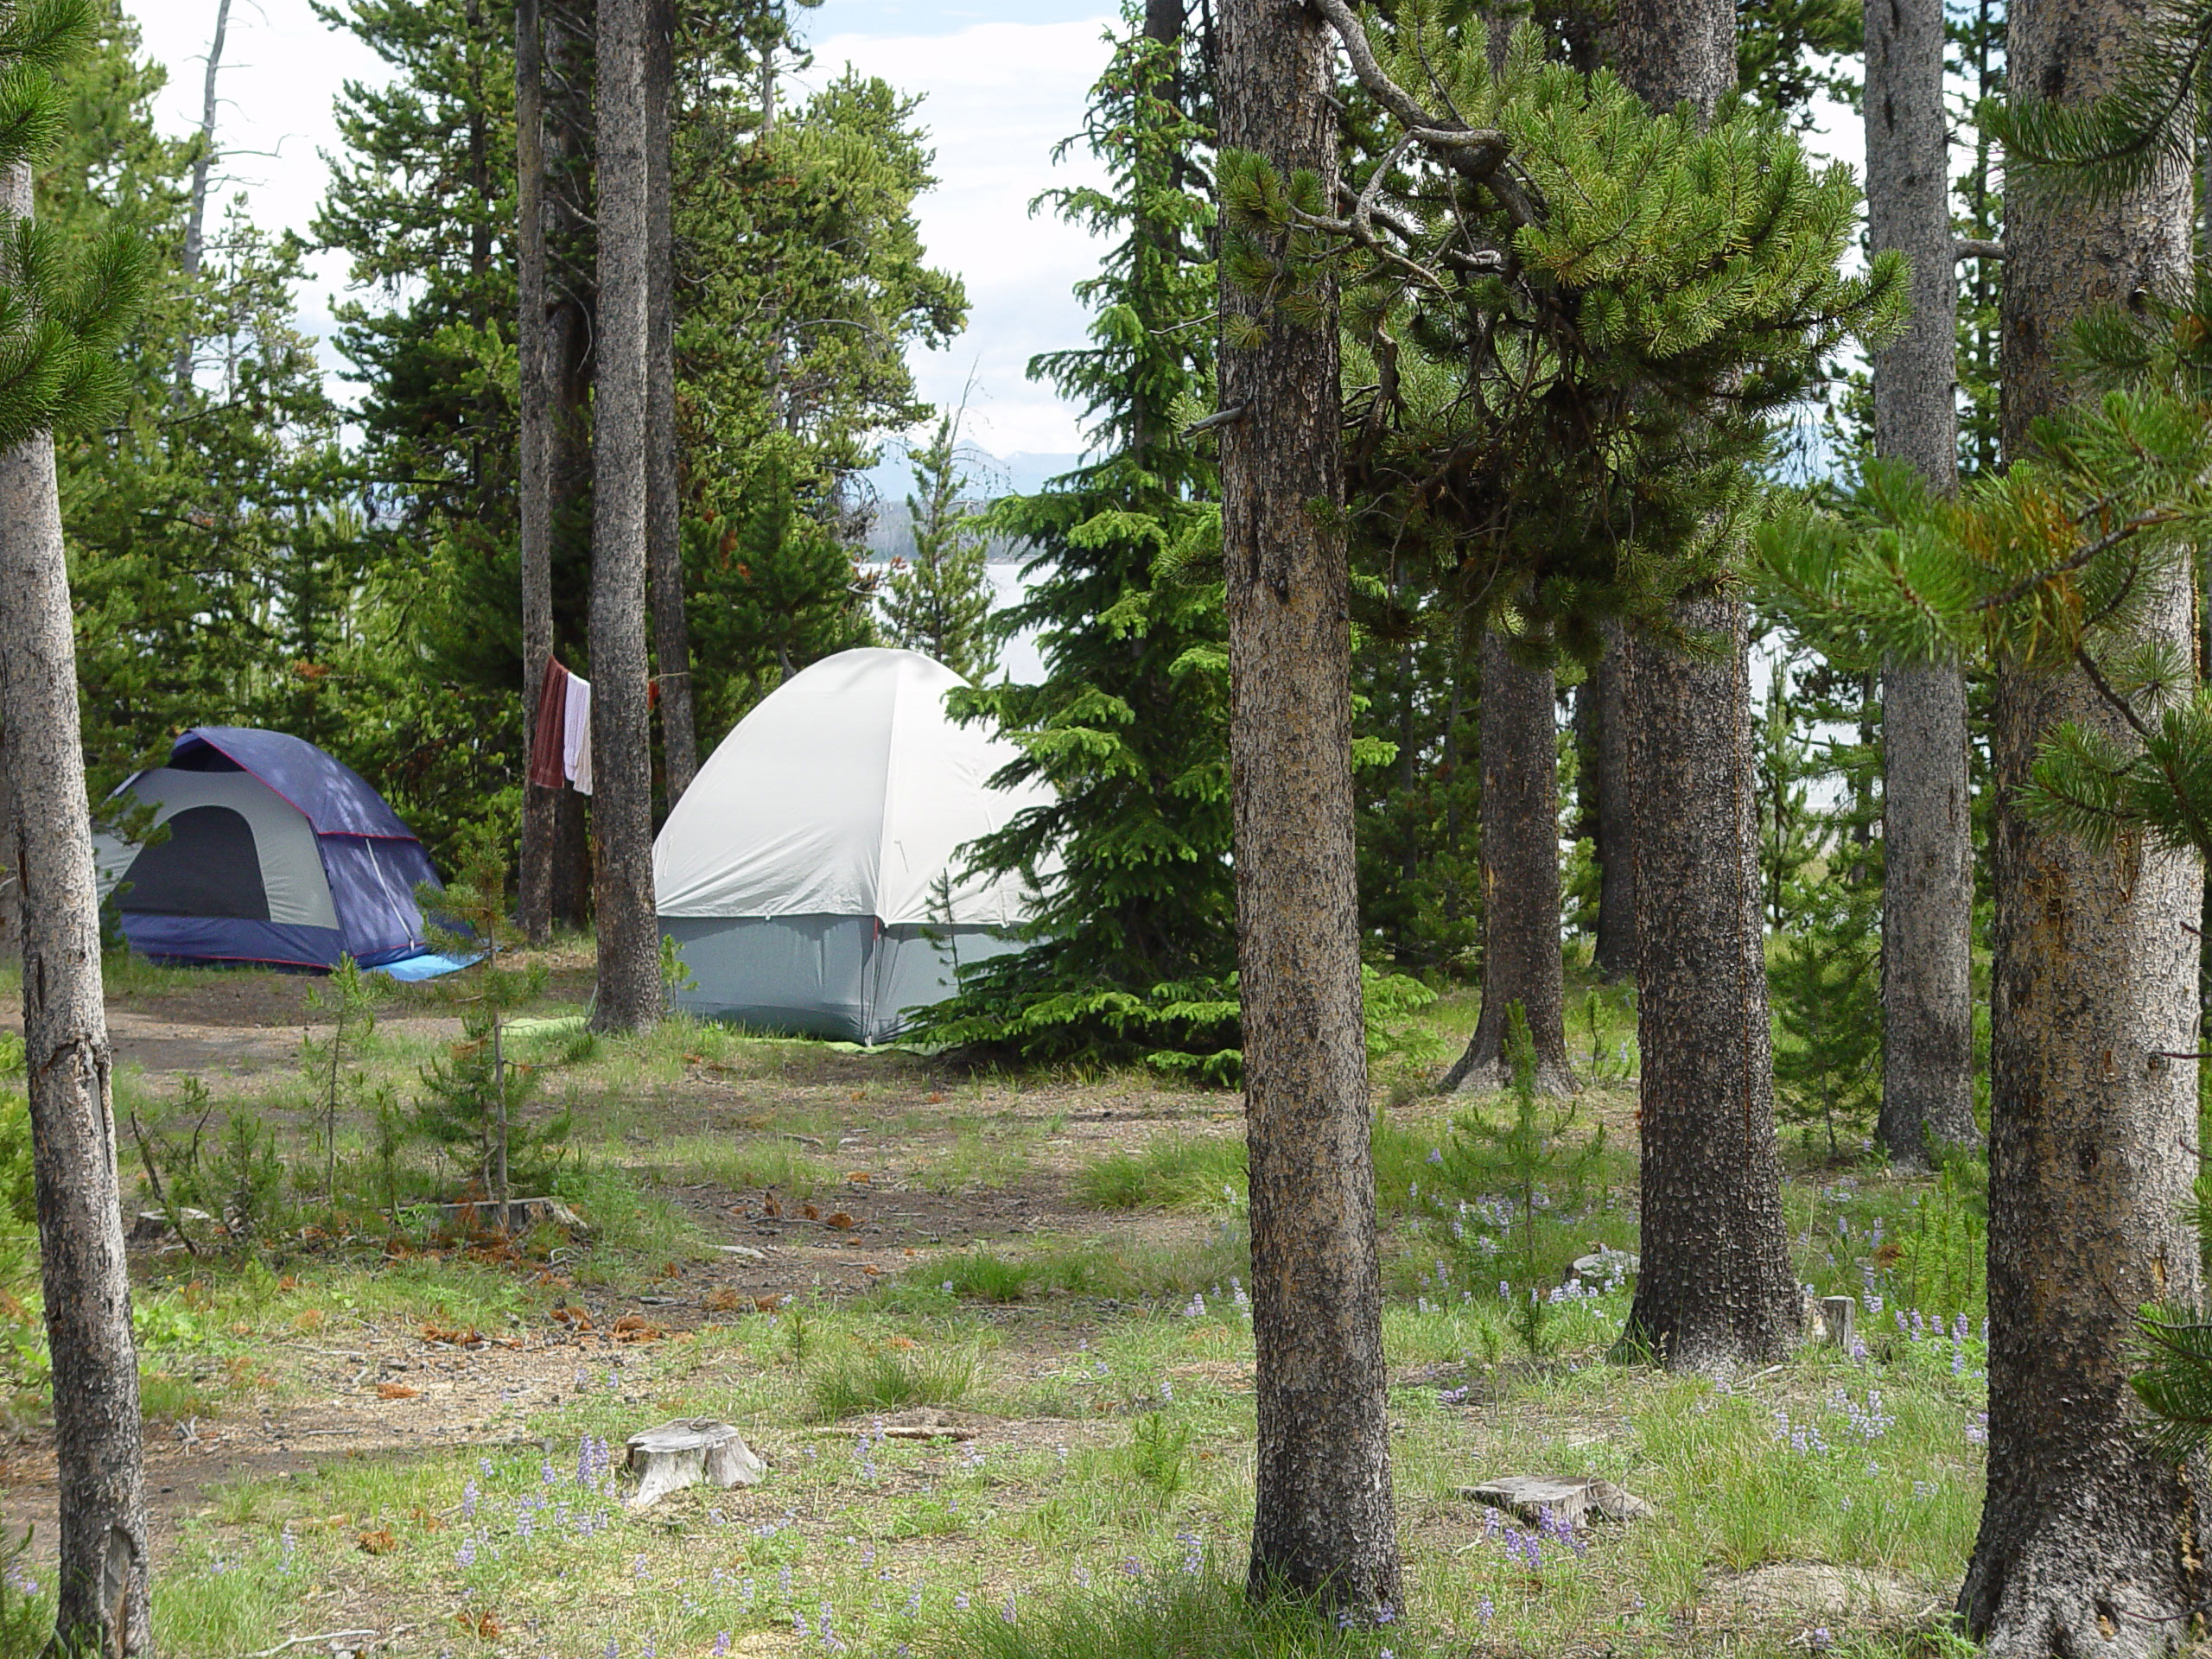 Lodging, dining, and camping